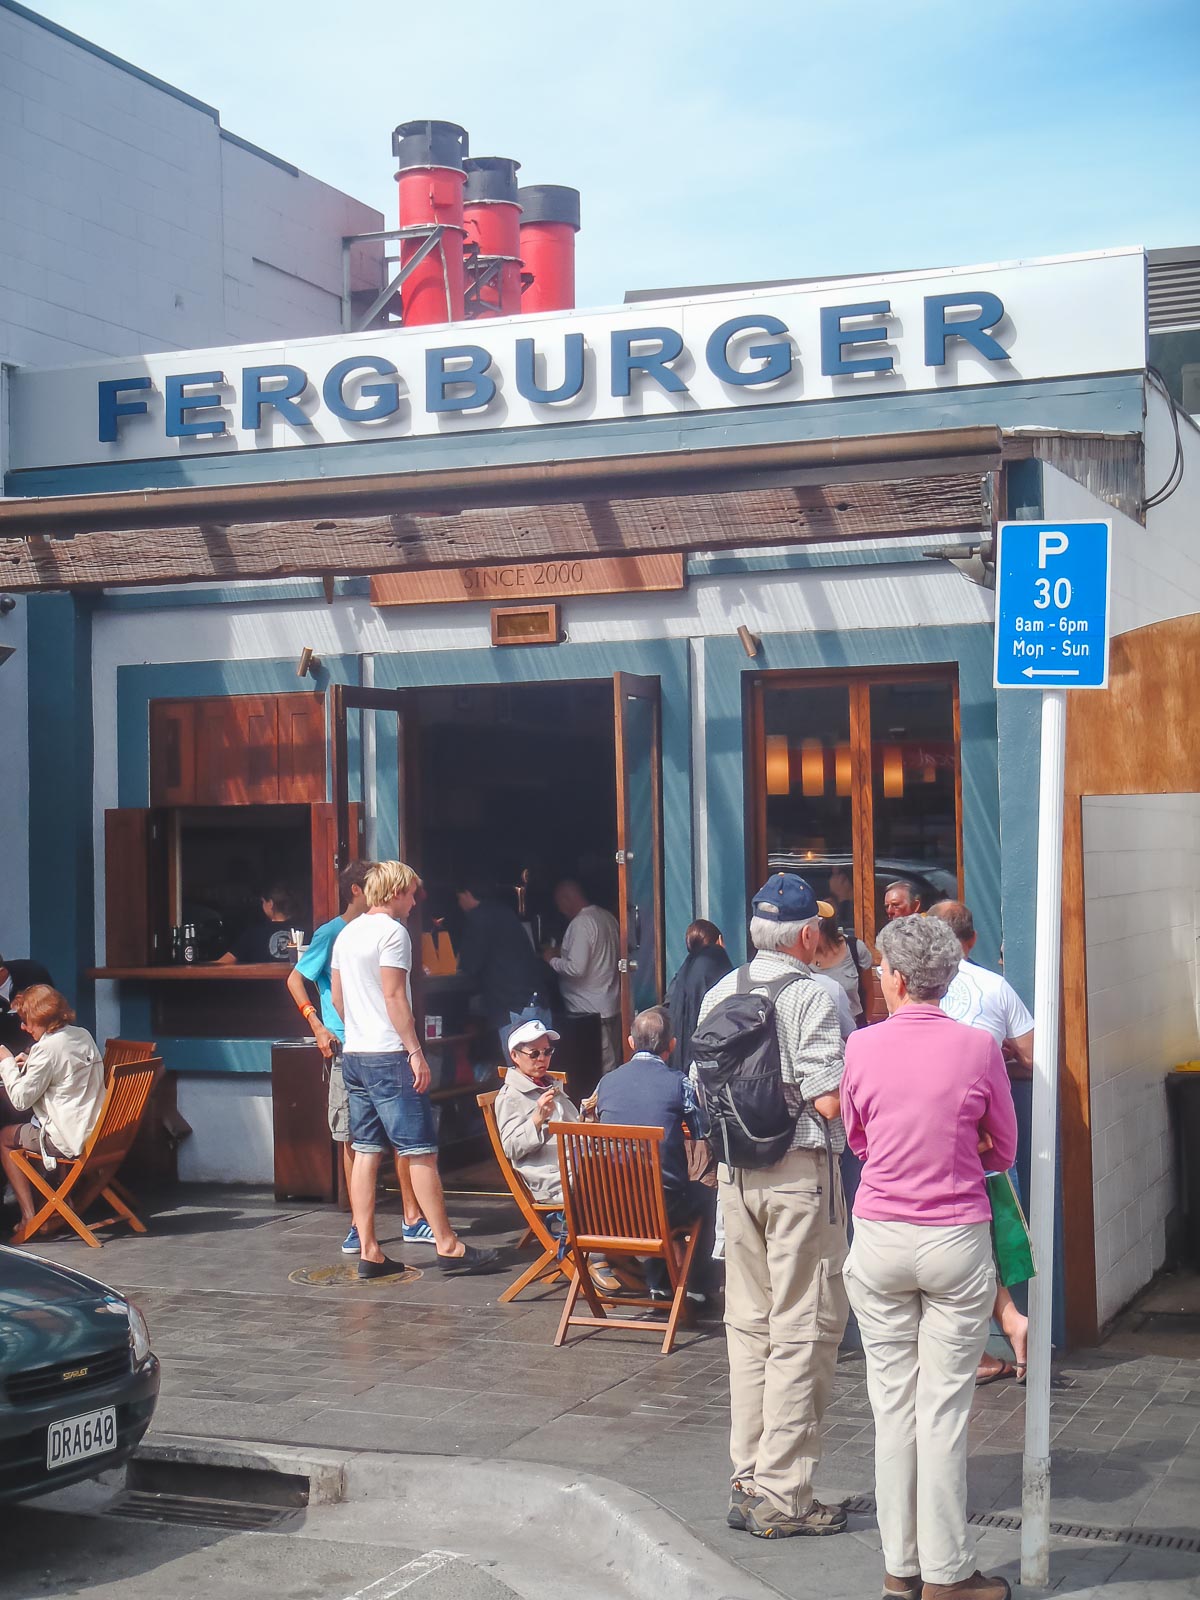 ferburger is the top place to eat in queenstown